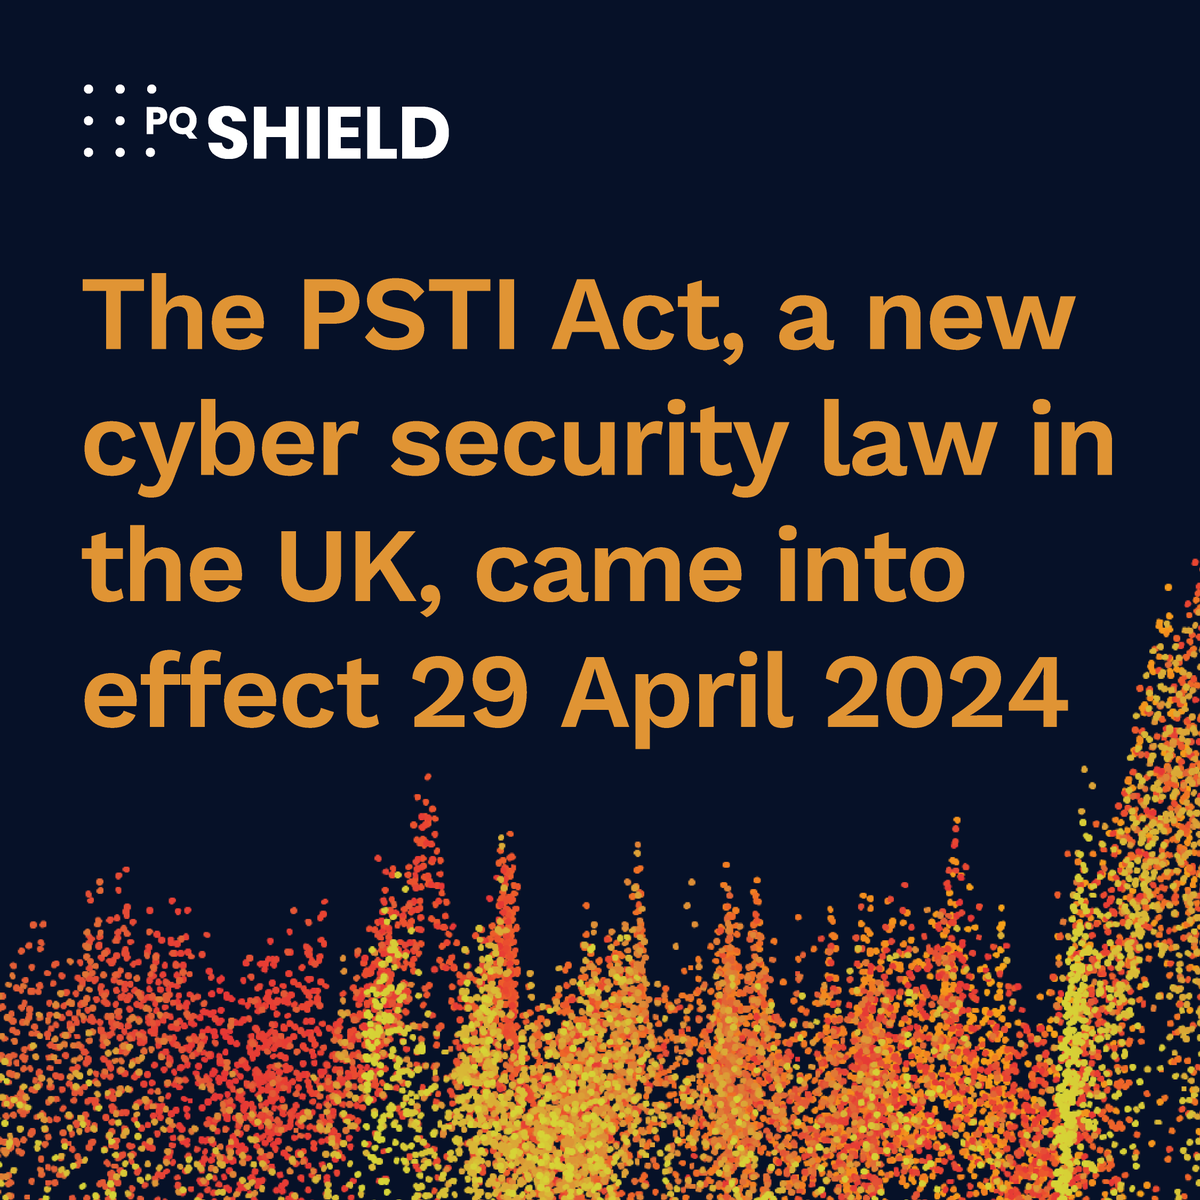 On April 29th, the UK’s new Product Security and Telecommunications Infrastructure (PSTI) Act was passed into law. Read more about this law and its implications for cyber security on our blog. hubs.ly/Q02x3XCV0 #PSTI #cybersecurity #productsecurity